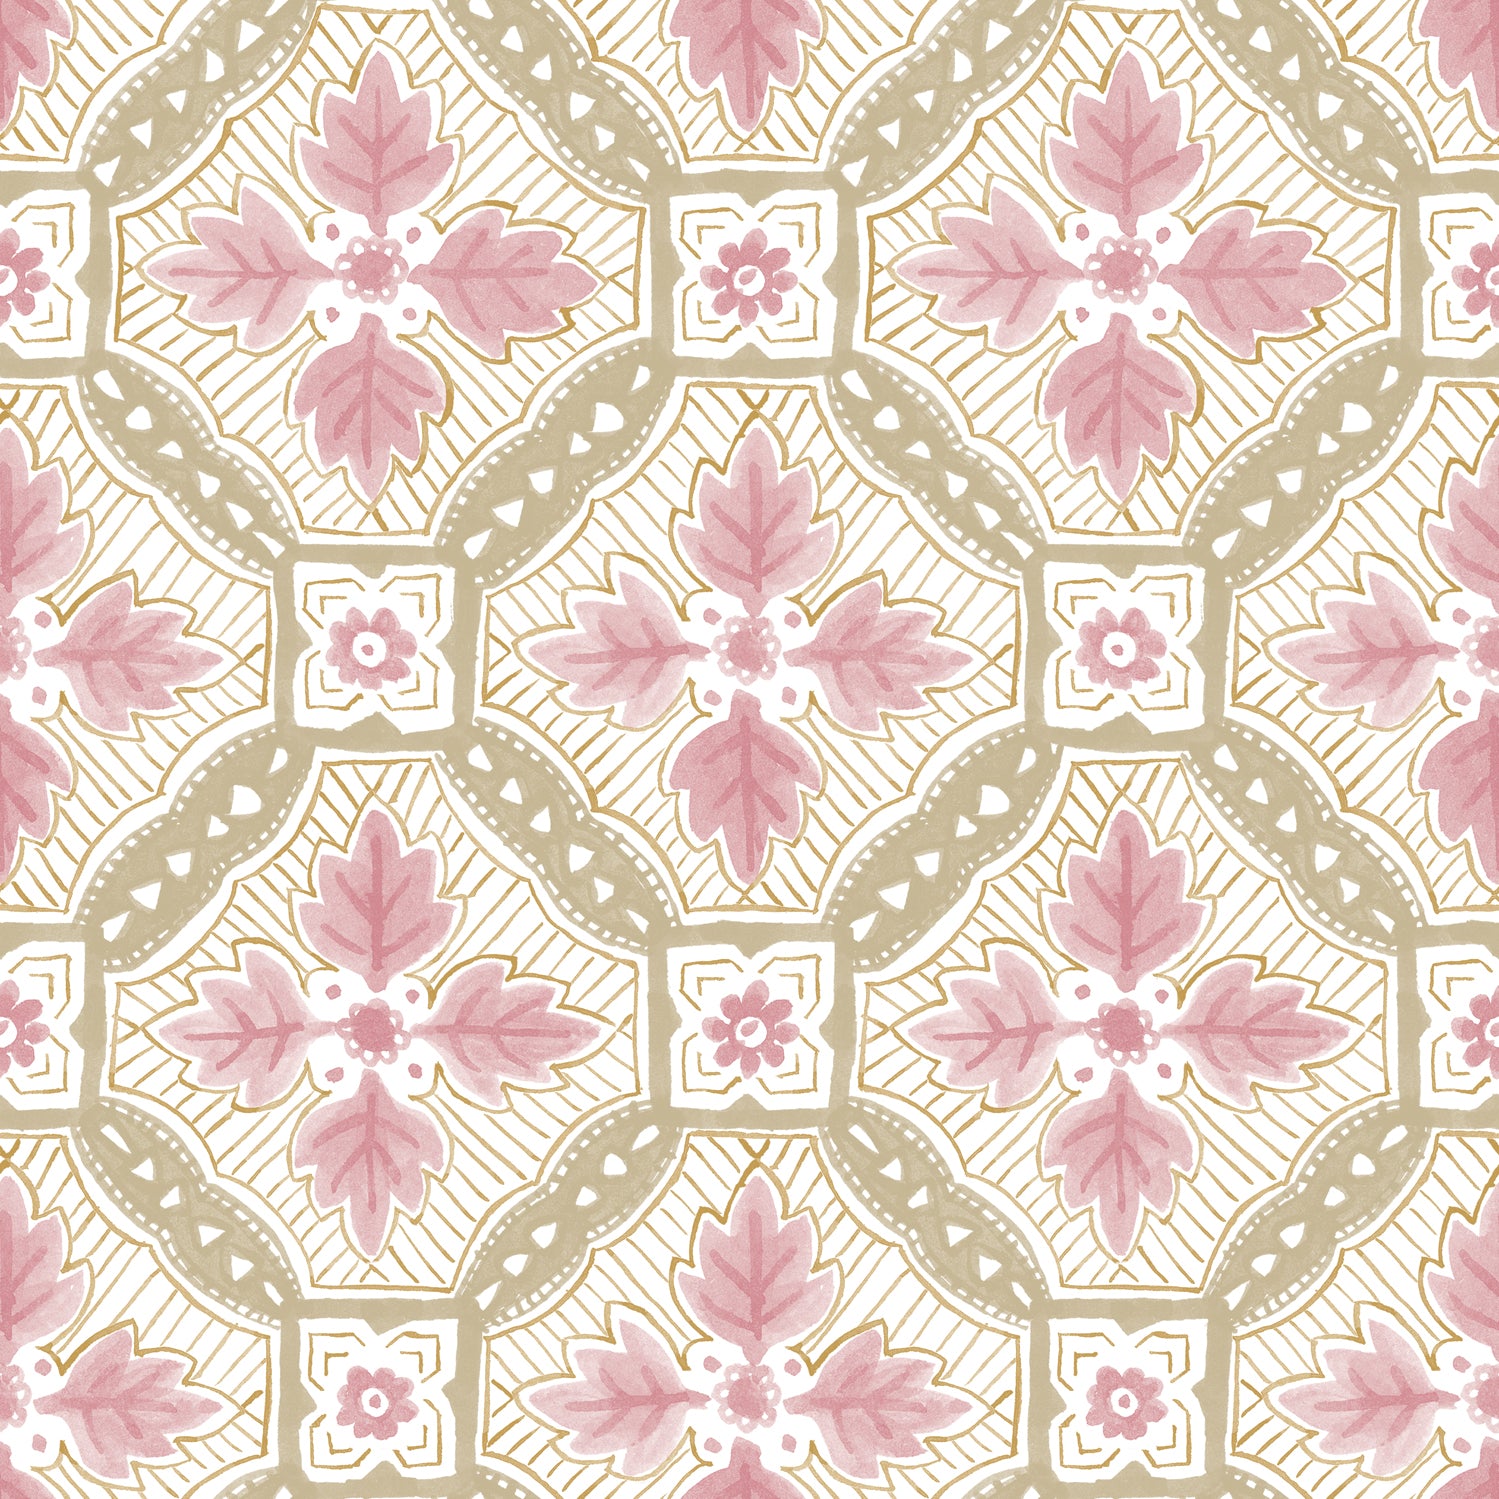 Detail of wallpaper in a painterly botanical grid in shades of pink and tan on a white field.